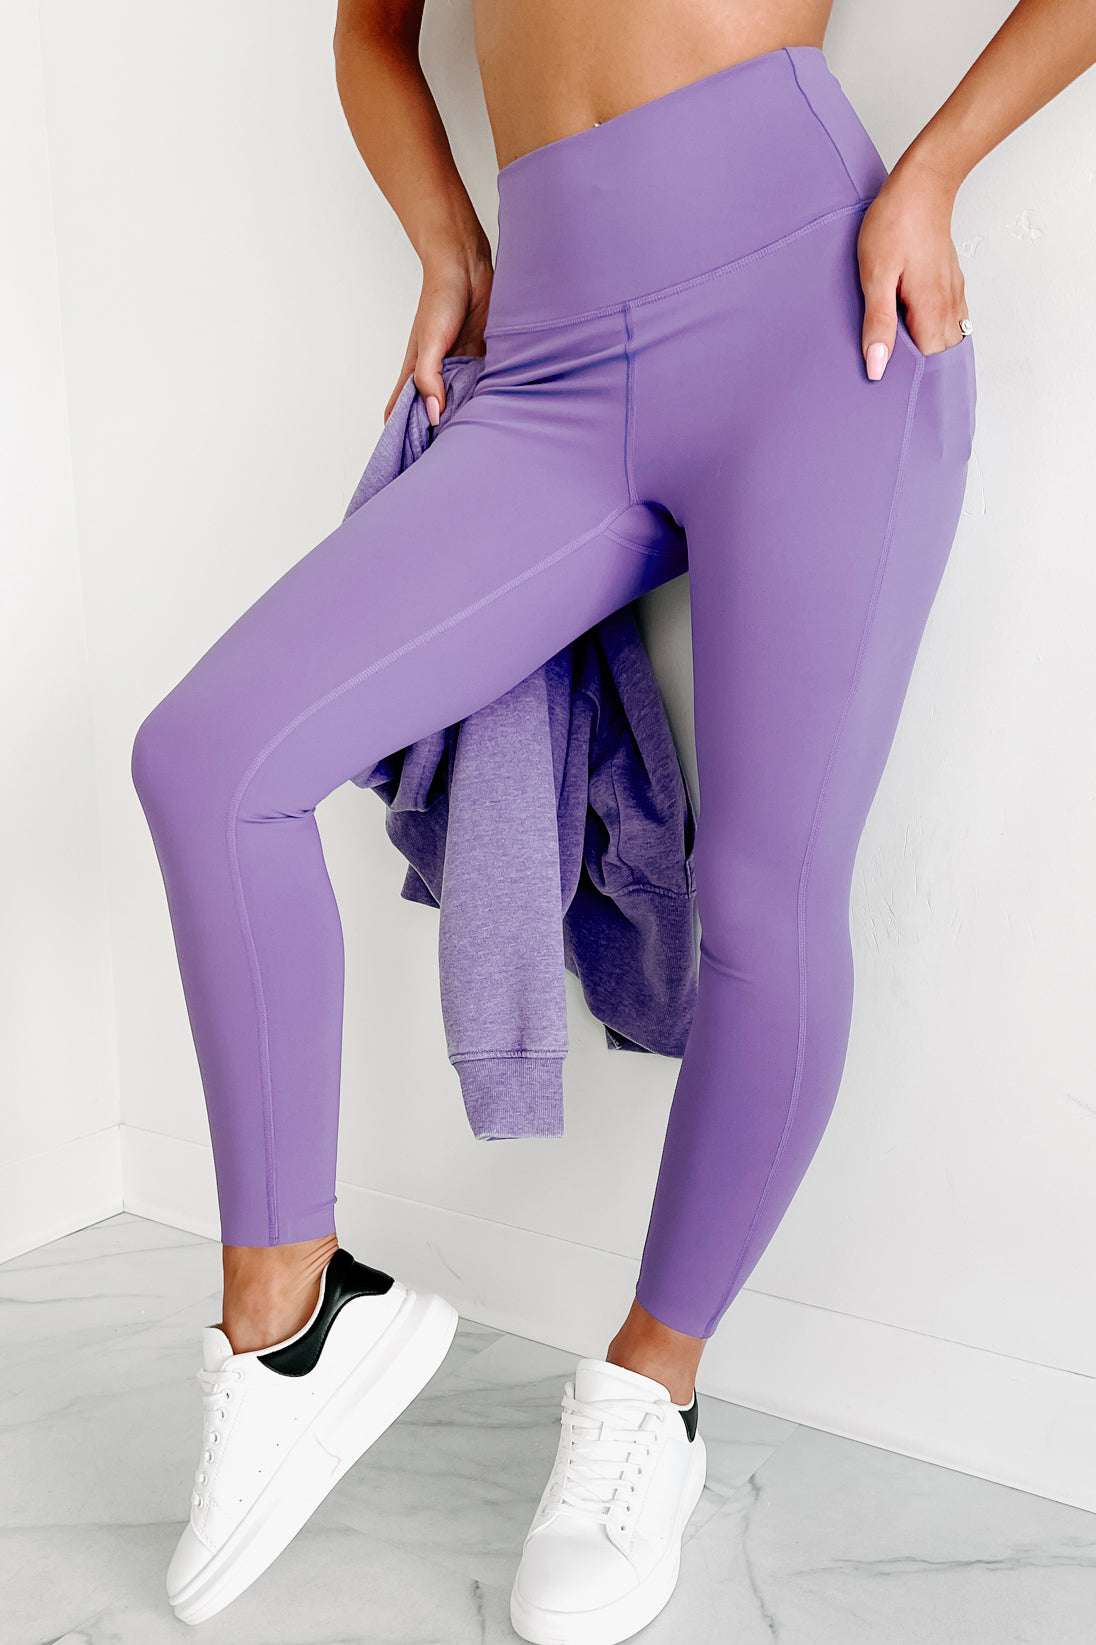 POSESHE Butter Soft Basic Leggings in Pinkish Purple - Perfect for